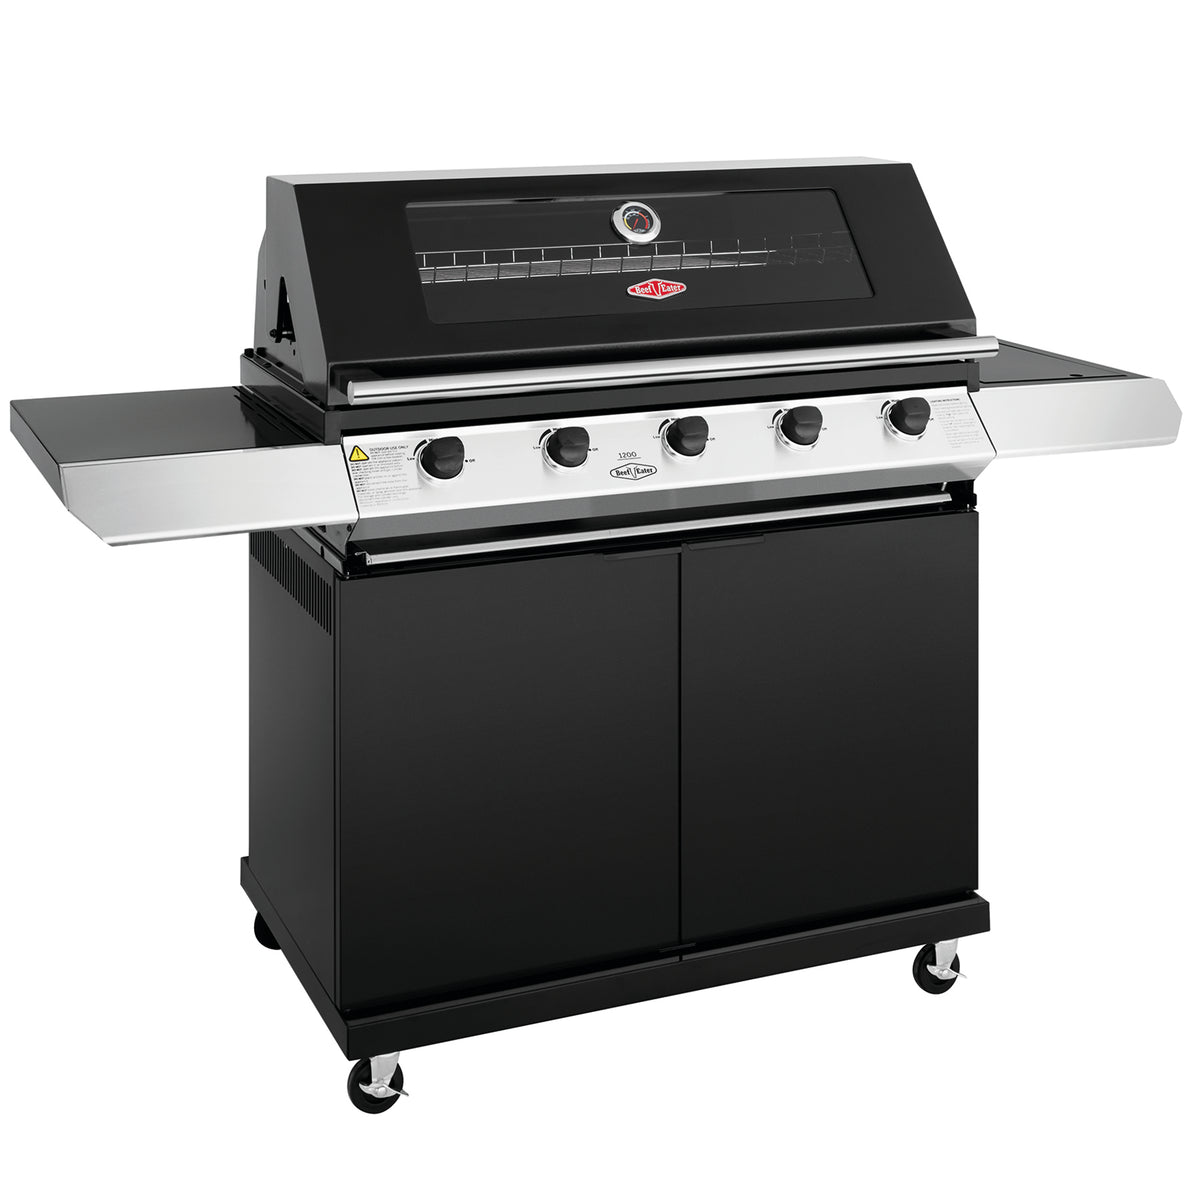 BeefEater 1200E Series 5 Burner Gas Barbecue with Cabinet Trolley and Side Burner